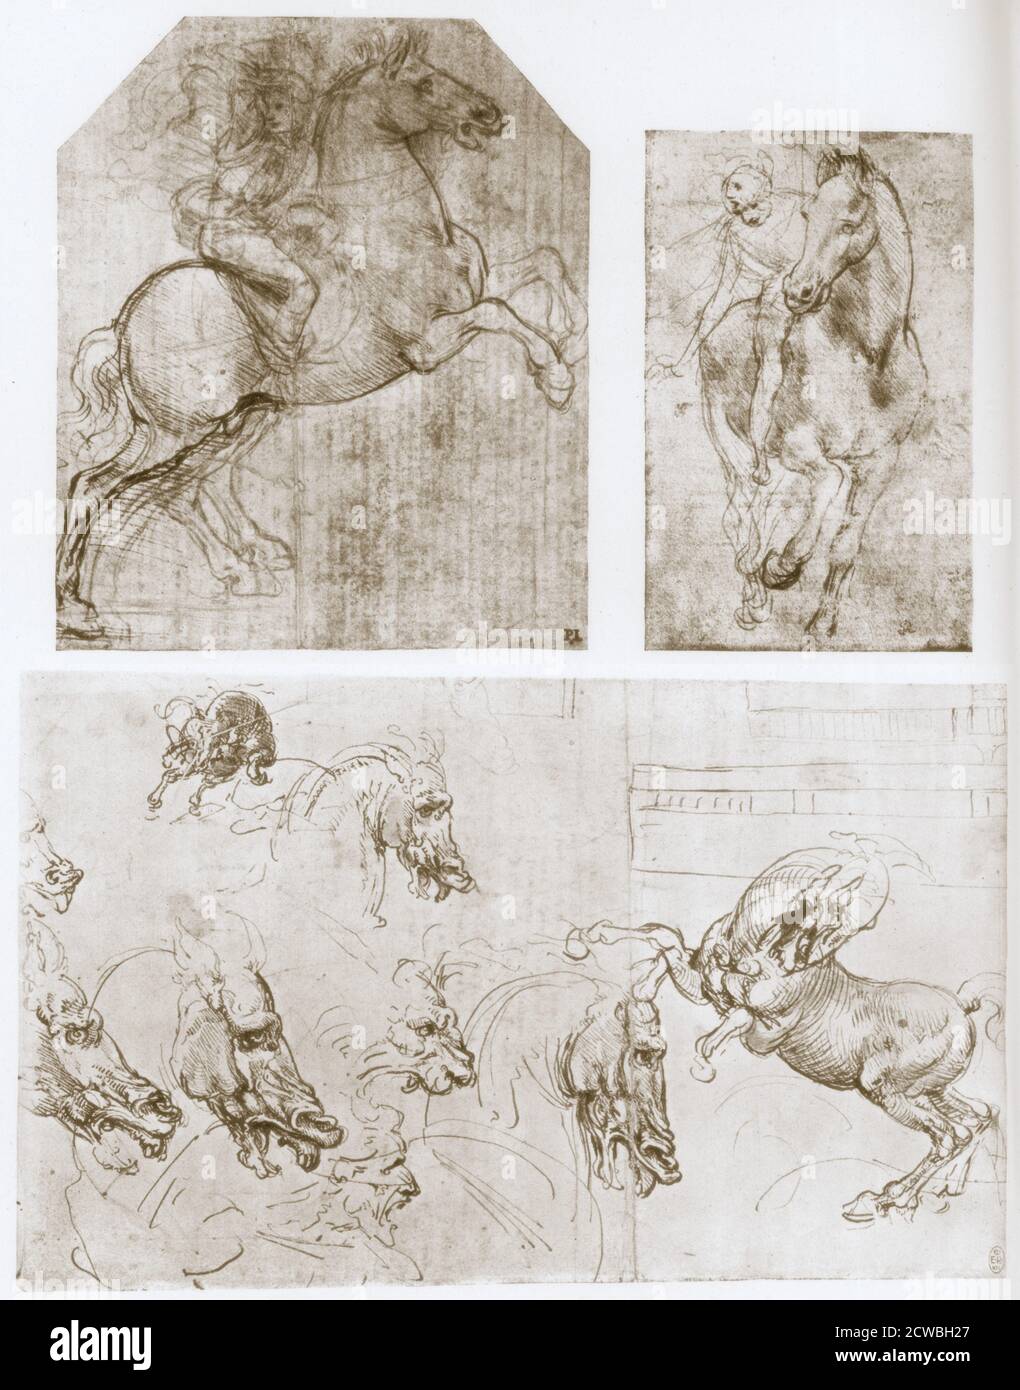 Horseman' by Leonardo da Vinci, 1480-1481. Study for 'The Adoration of the Kings', from the collection of Captain Colville, London, England; top right: 'Horseman', 1480-1481, Study for 'The Adoration of the Kings', from the collection of John Nicholas Brown, Rhode Island, U.S.A.; bottom: 'Horse, Lion's Head, and Face of Man, c1504, Studies for 'The Battle of Anghiari', from the collection of the Royal Library, Windsor Castle, Windsor, England. Stock Photo